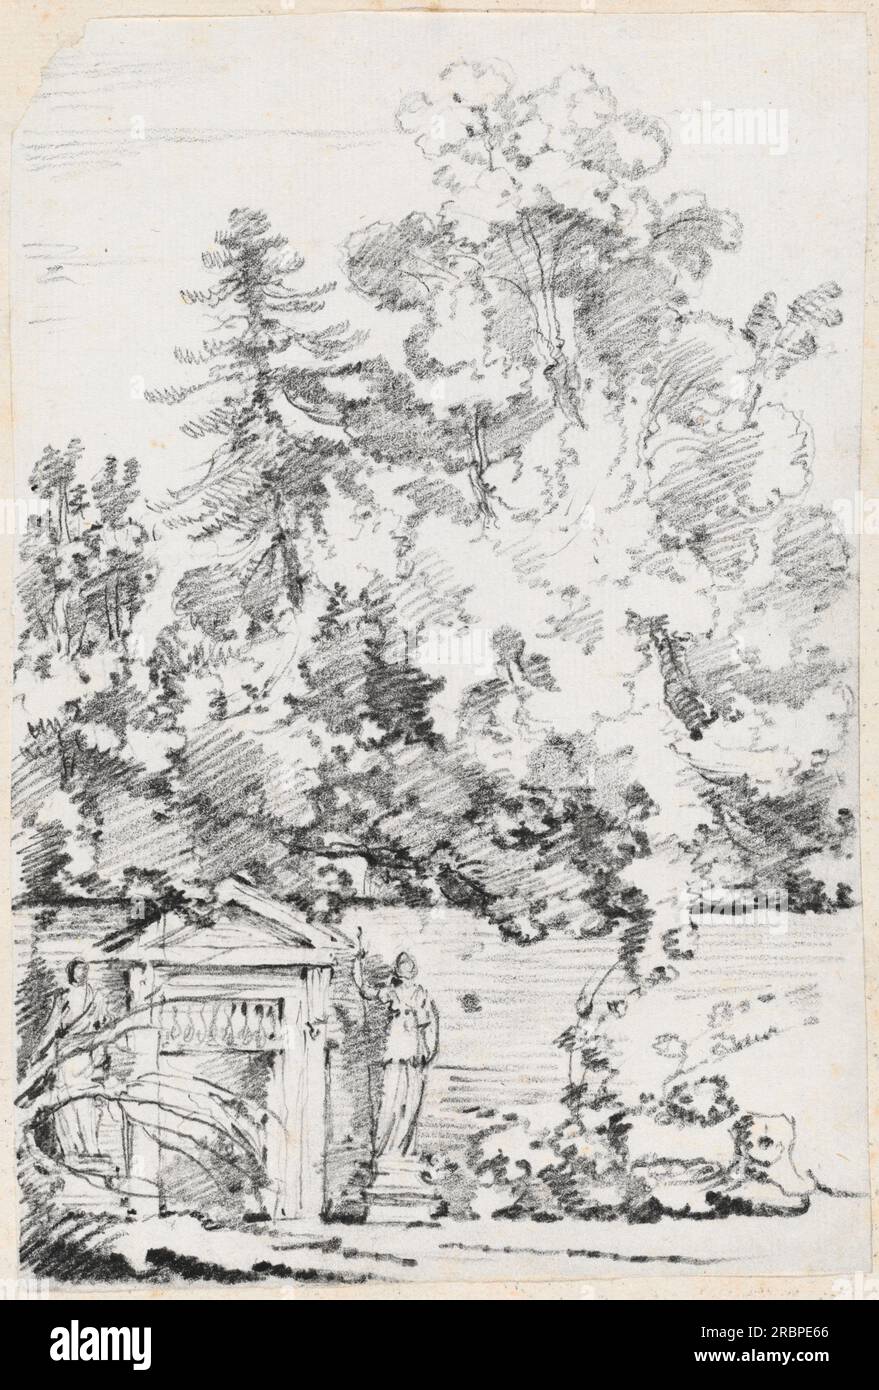 'Joseph-Marie Vien, Entrance to a Walled Garden, 1744/1750, graphite on laid paper, sheet: 19 x 18.5 cm (7 1/2 x 7 5/16 in.) page size: 42.5 x 27.7 cm (16 3/4 x 10 7/8 in.), Mark J. Millard Architectural Collection, 1983.49.166' Stock Photo